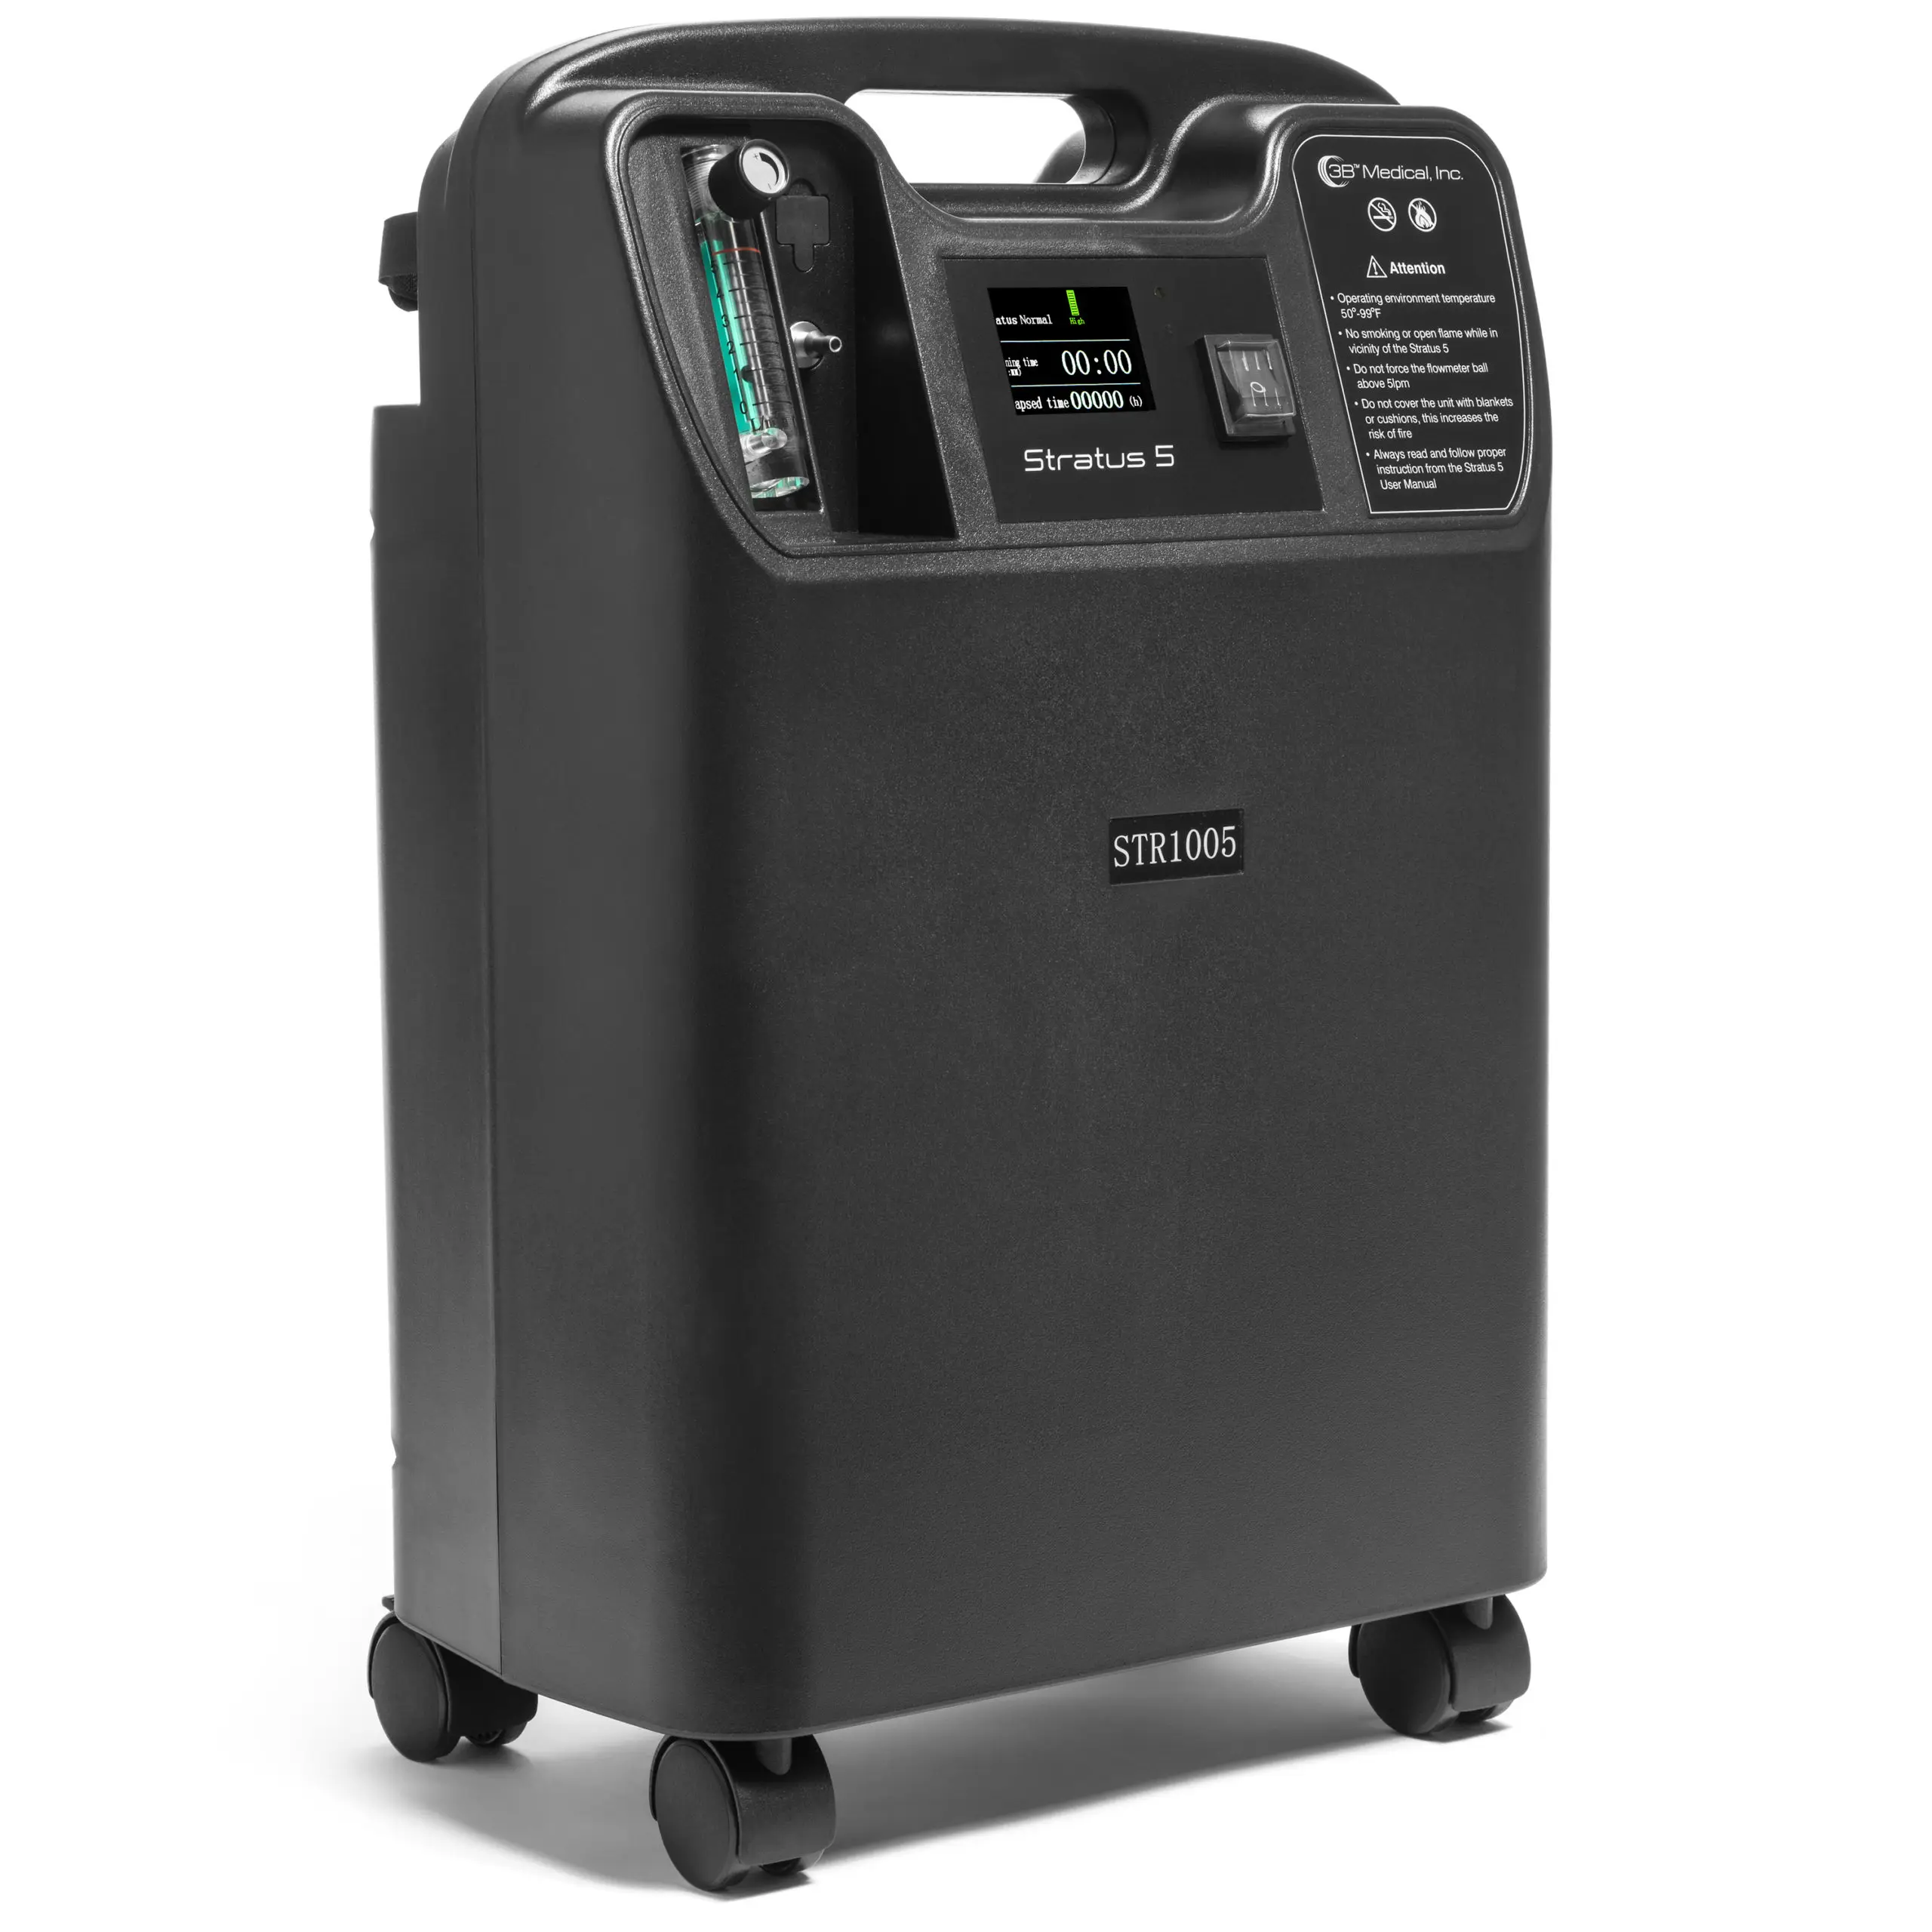 Medical oxygen concentrator portable oxygen generator for oxygen therapy